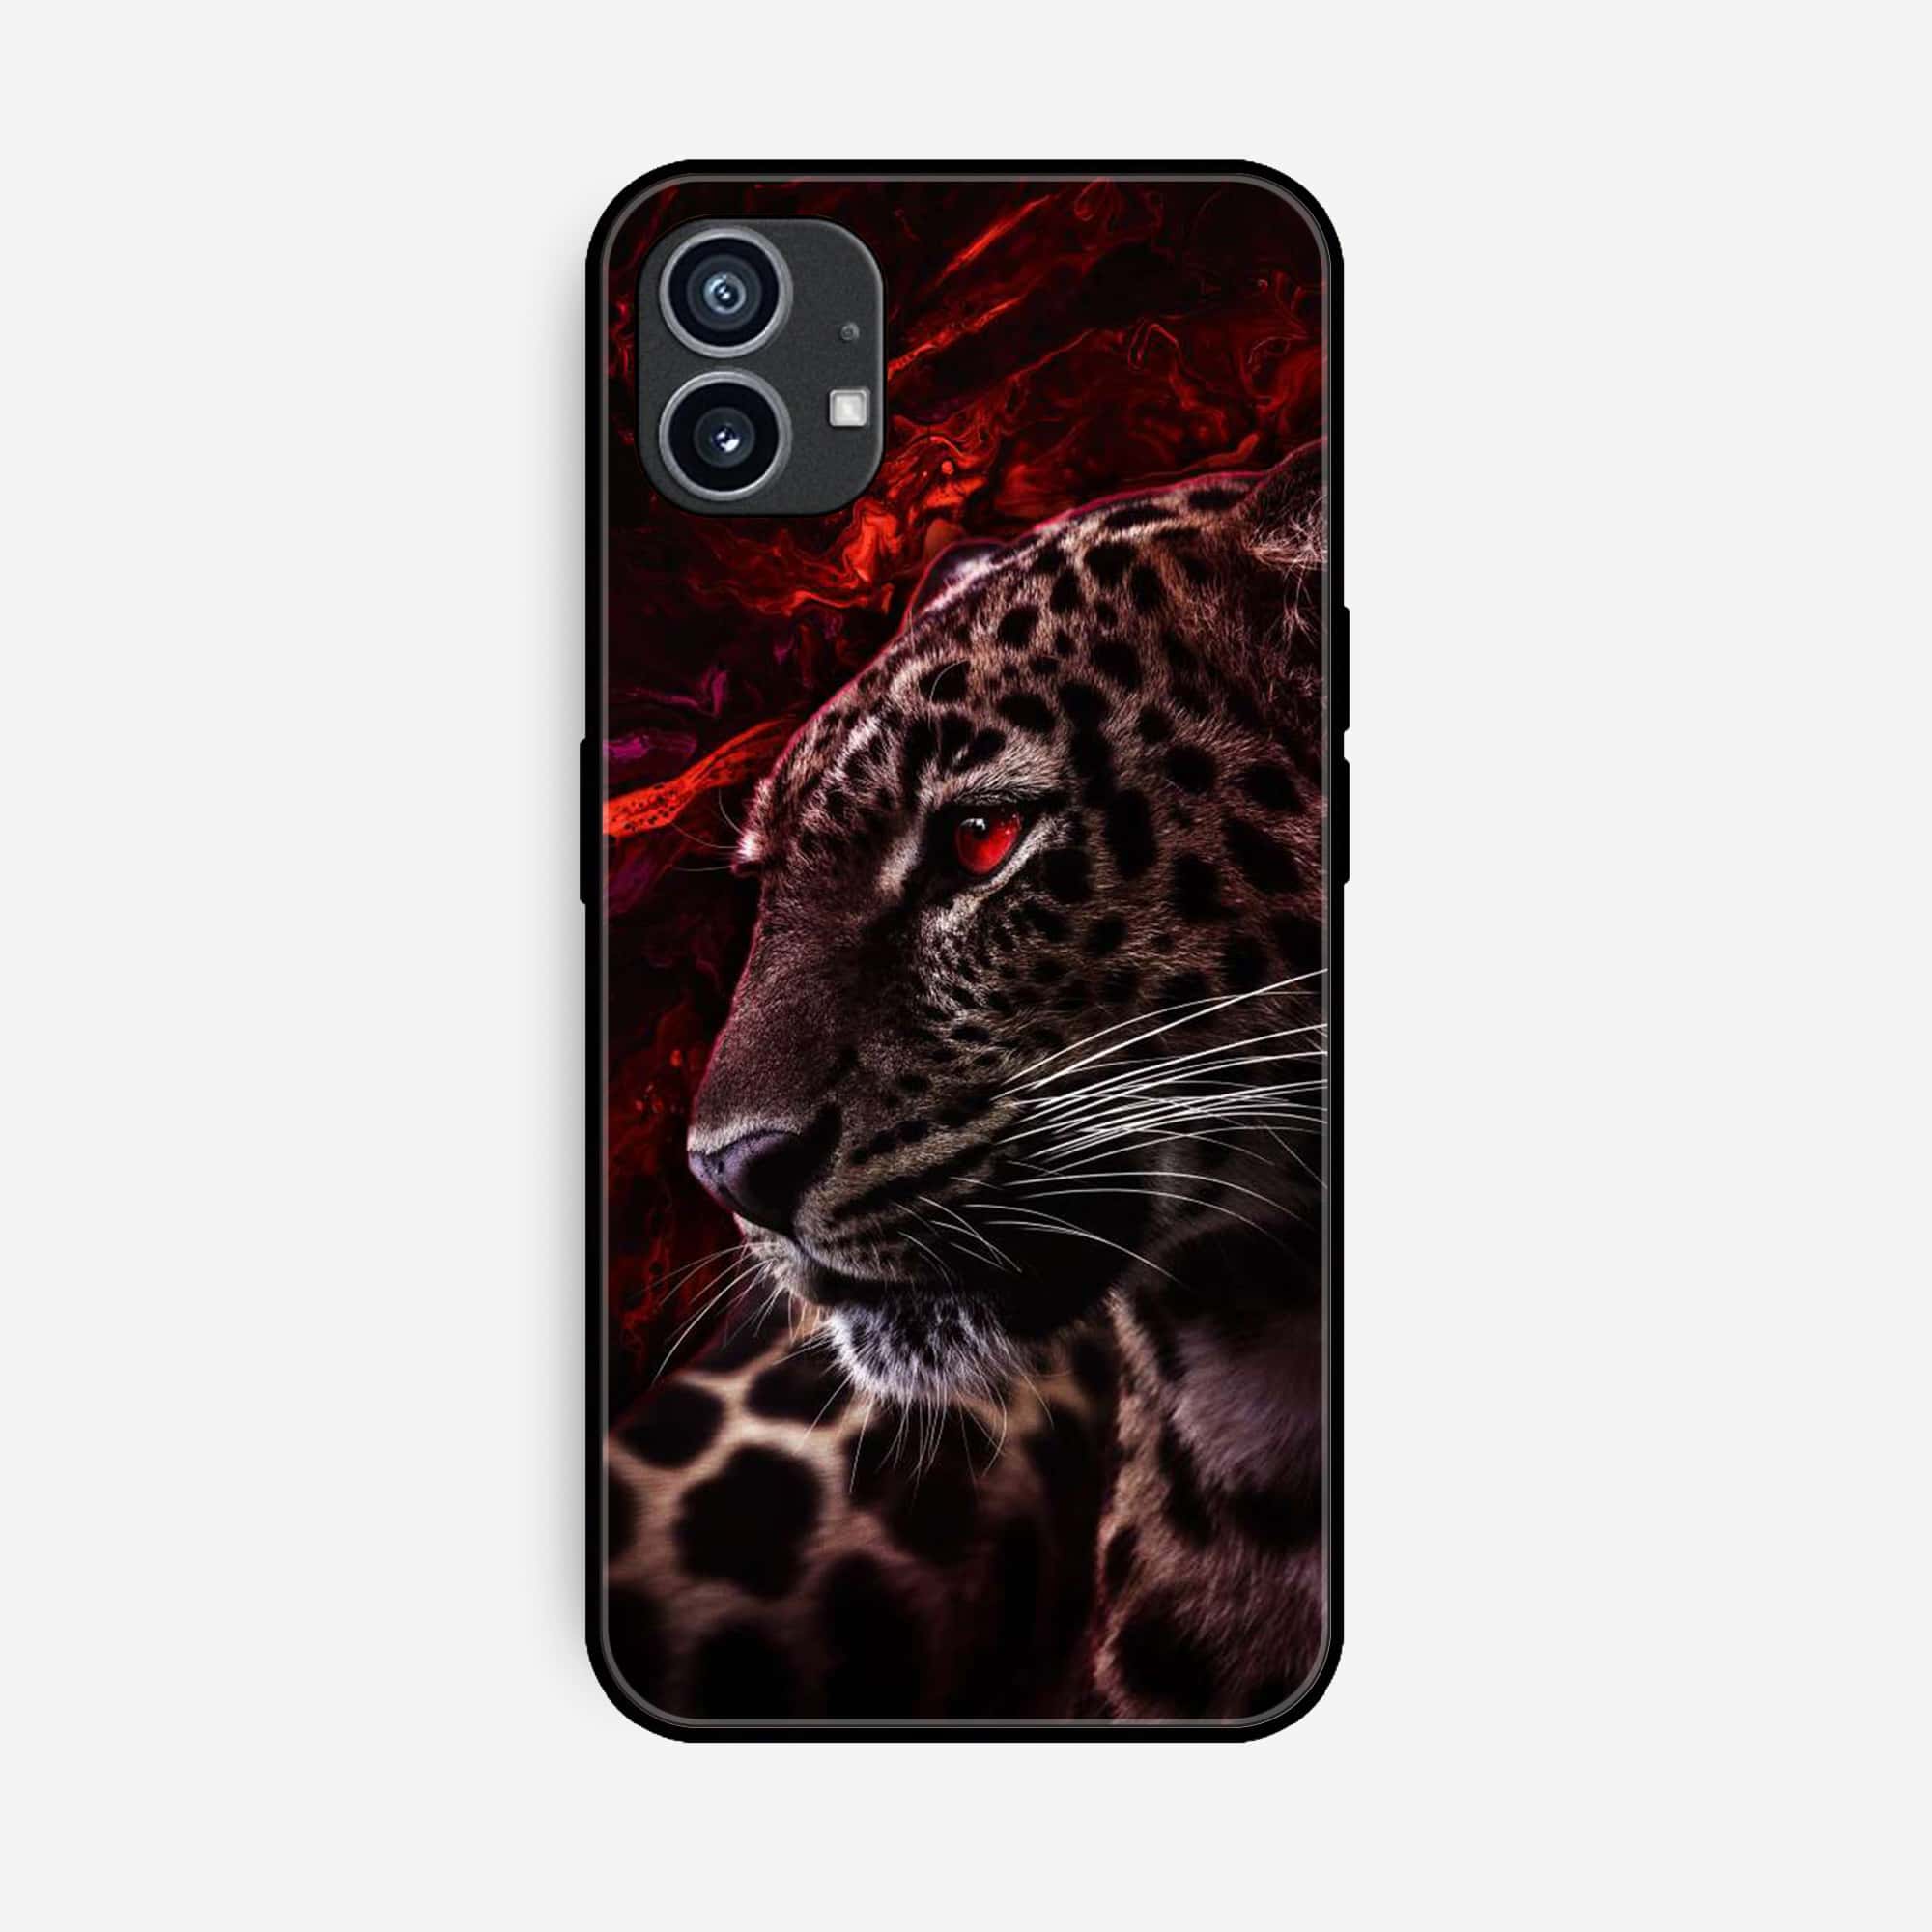 Nothing Phone 1  Tiger Series Premium Printed Glass soft Bumper shock Proof Case